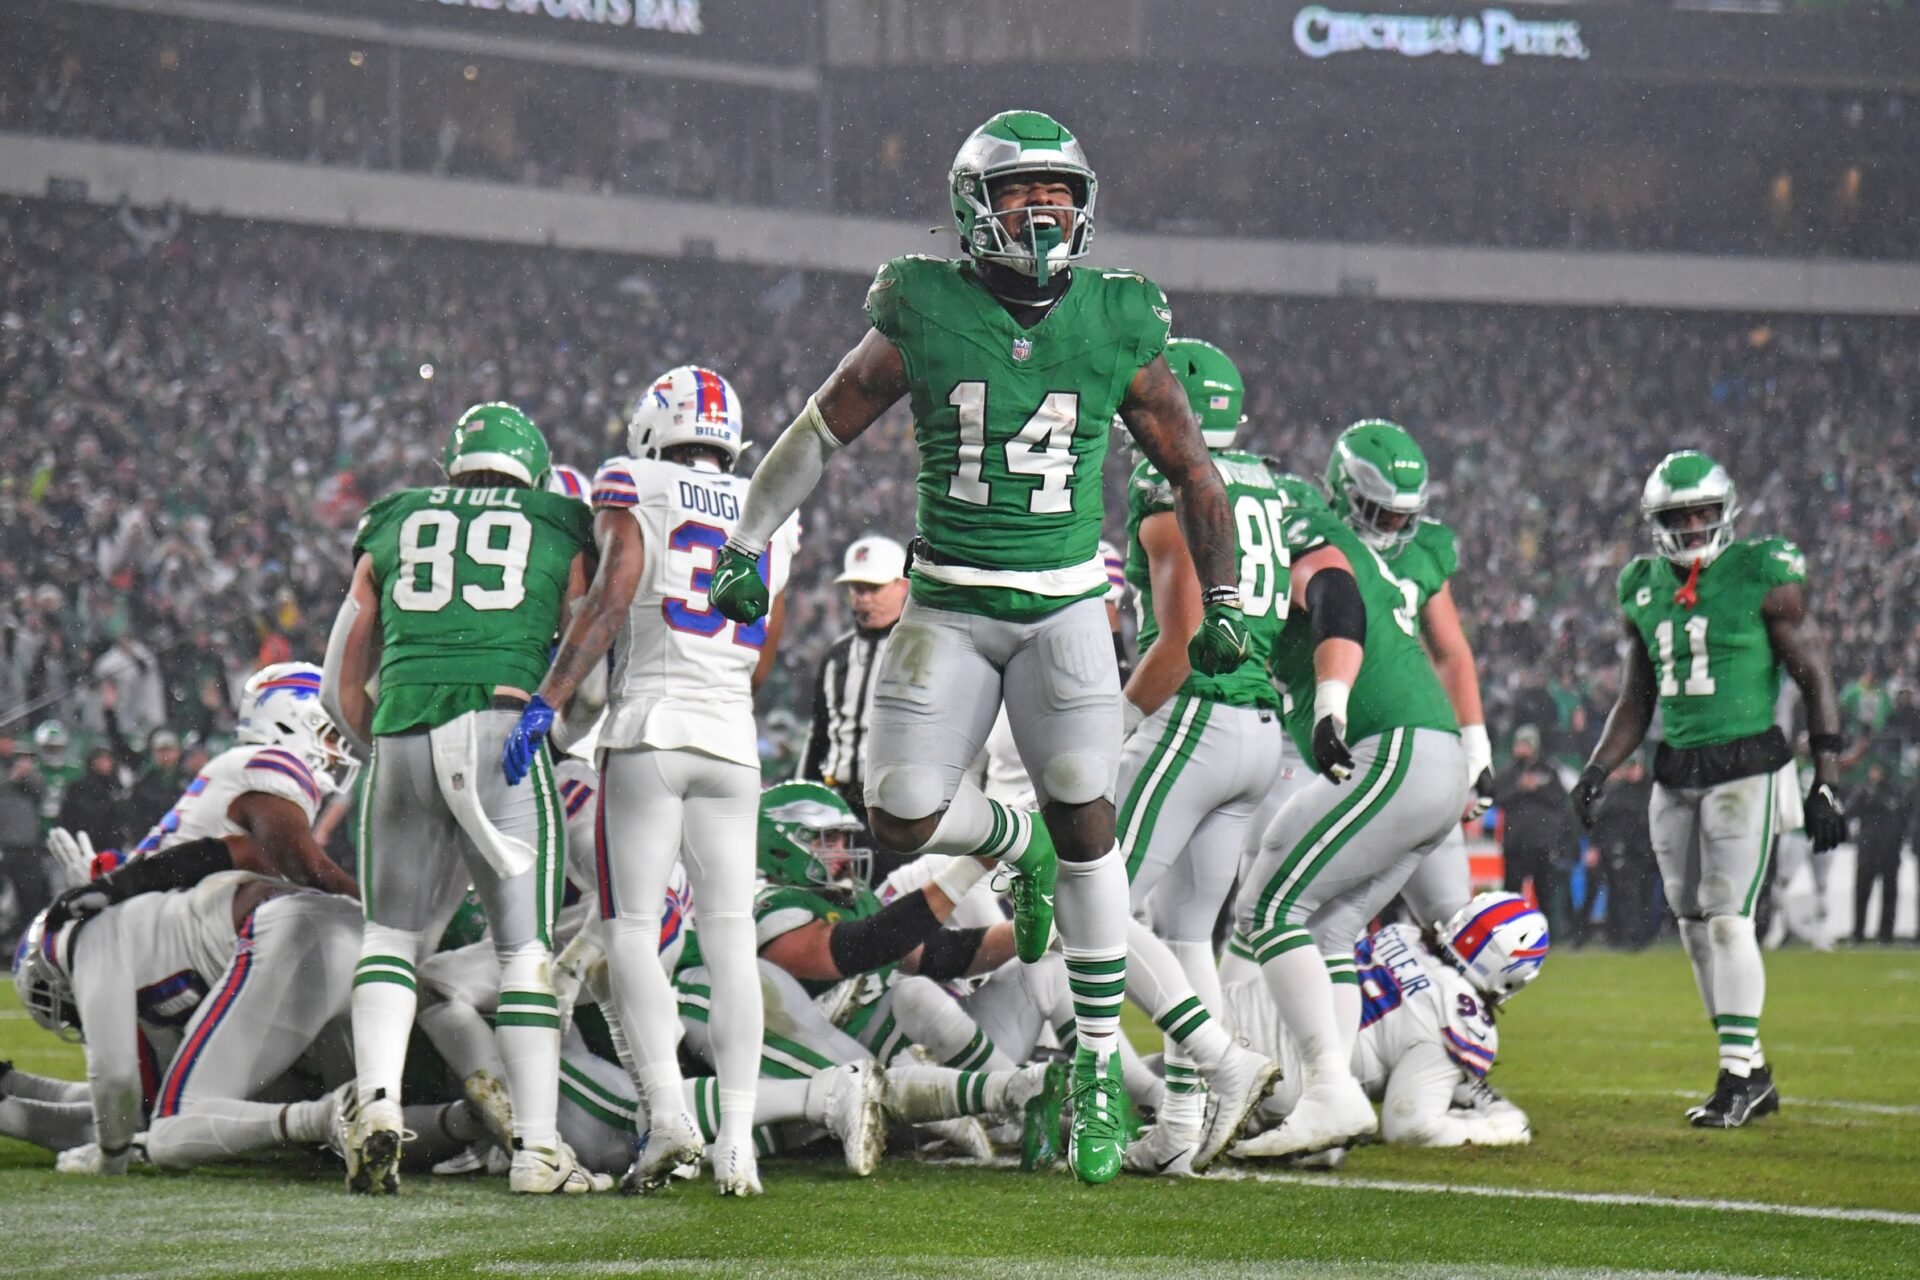 Philadelphia Eagles running back Kenneth Gainwell (14) celebrates touchdown run by quarterback Jalen Hurts (1) (not pictured) against the Buffalo Bills during the first quarter at Lincoln Financial Field. Mandatory Credit: Eric Hartline-USA TODAY Sports